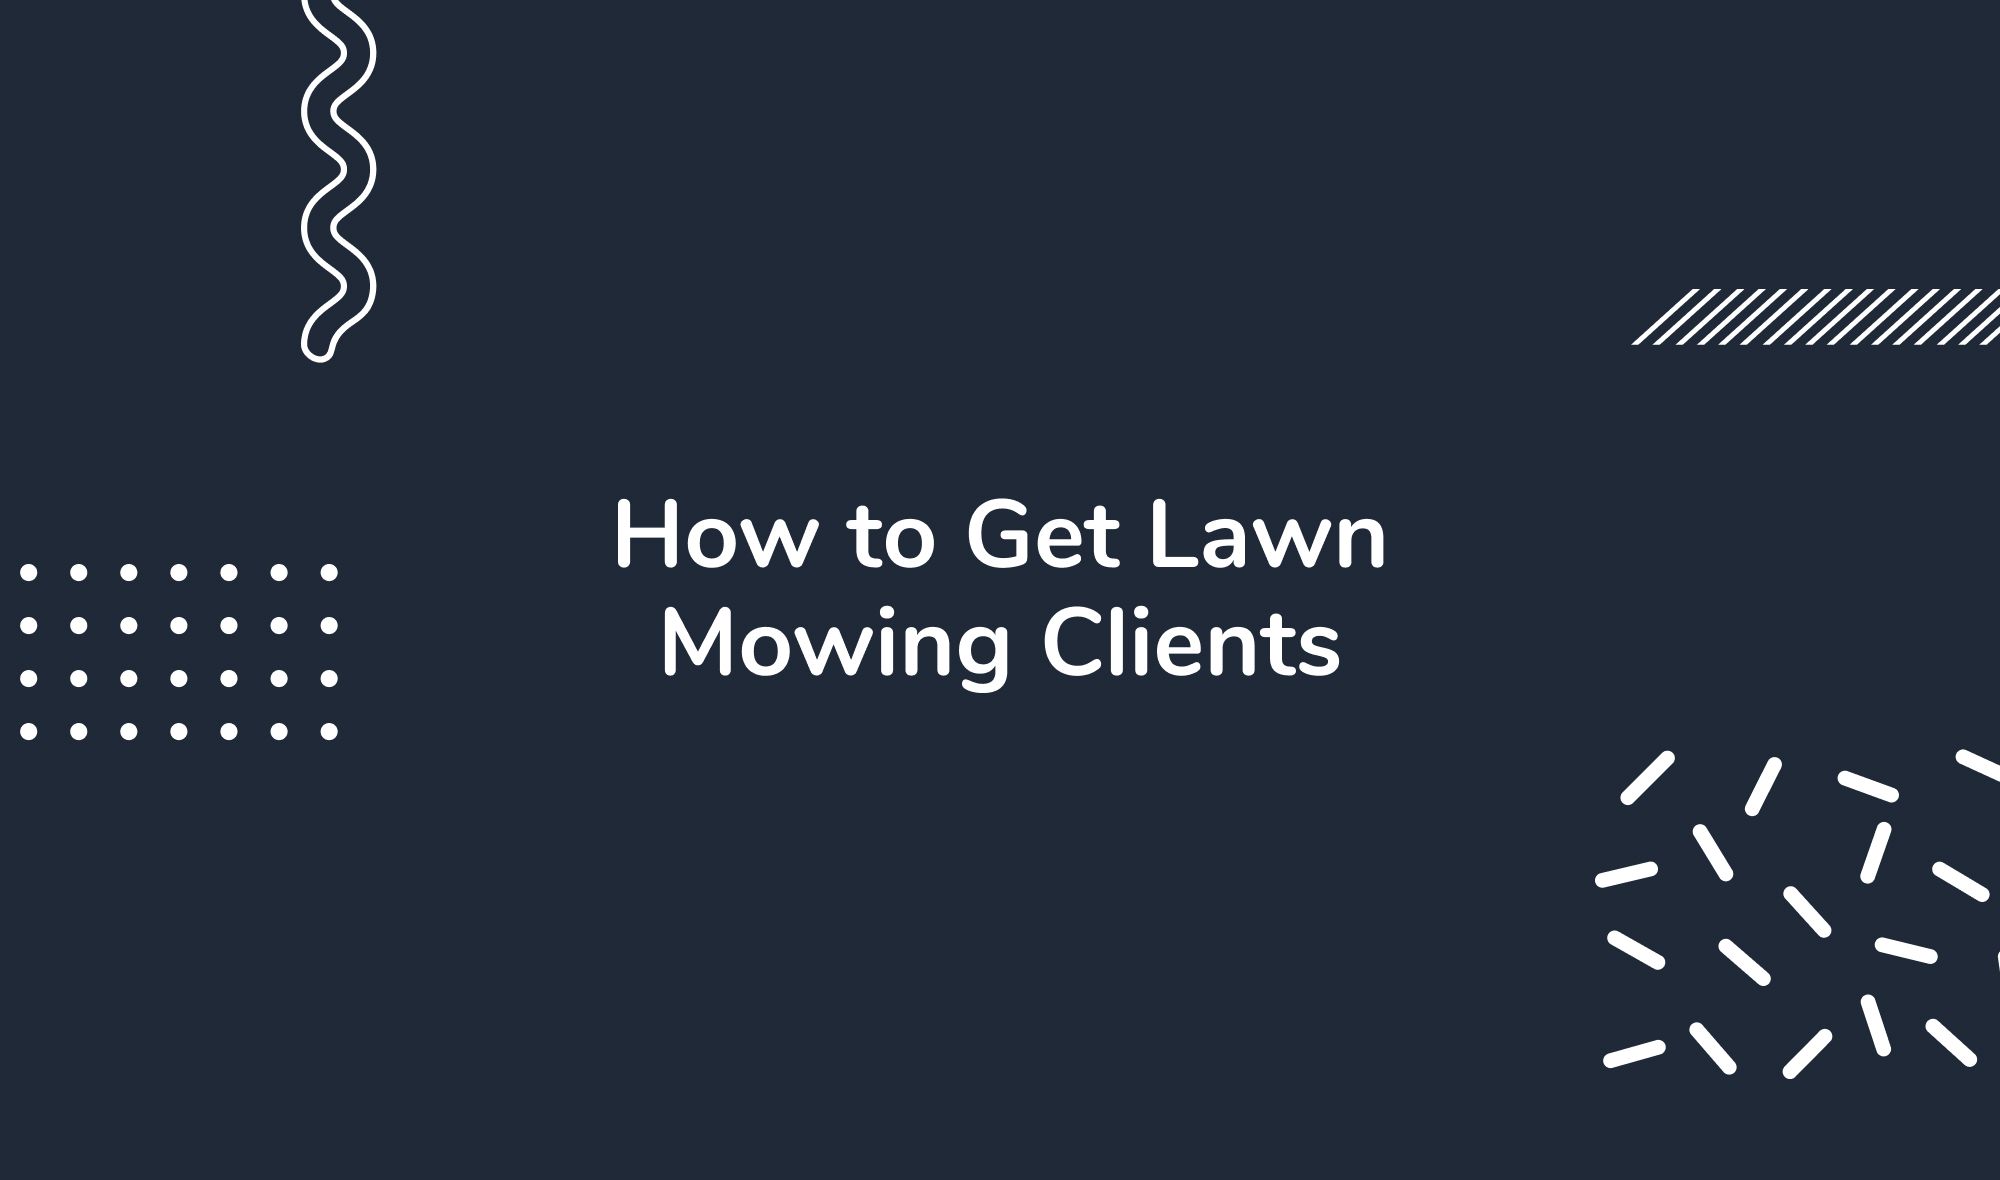 How to Get Lawn Mowing Clients